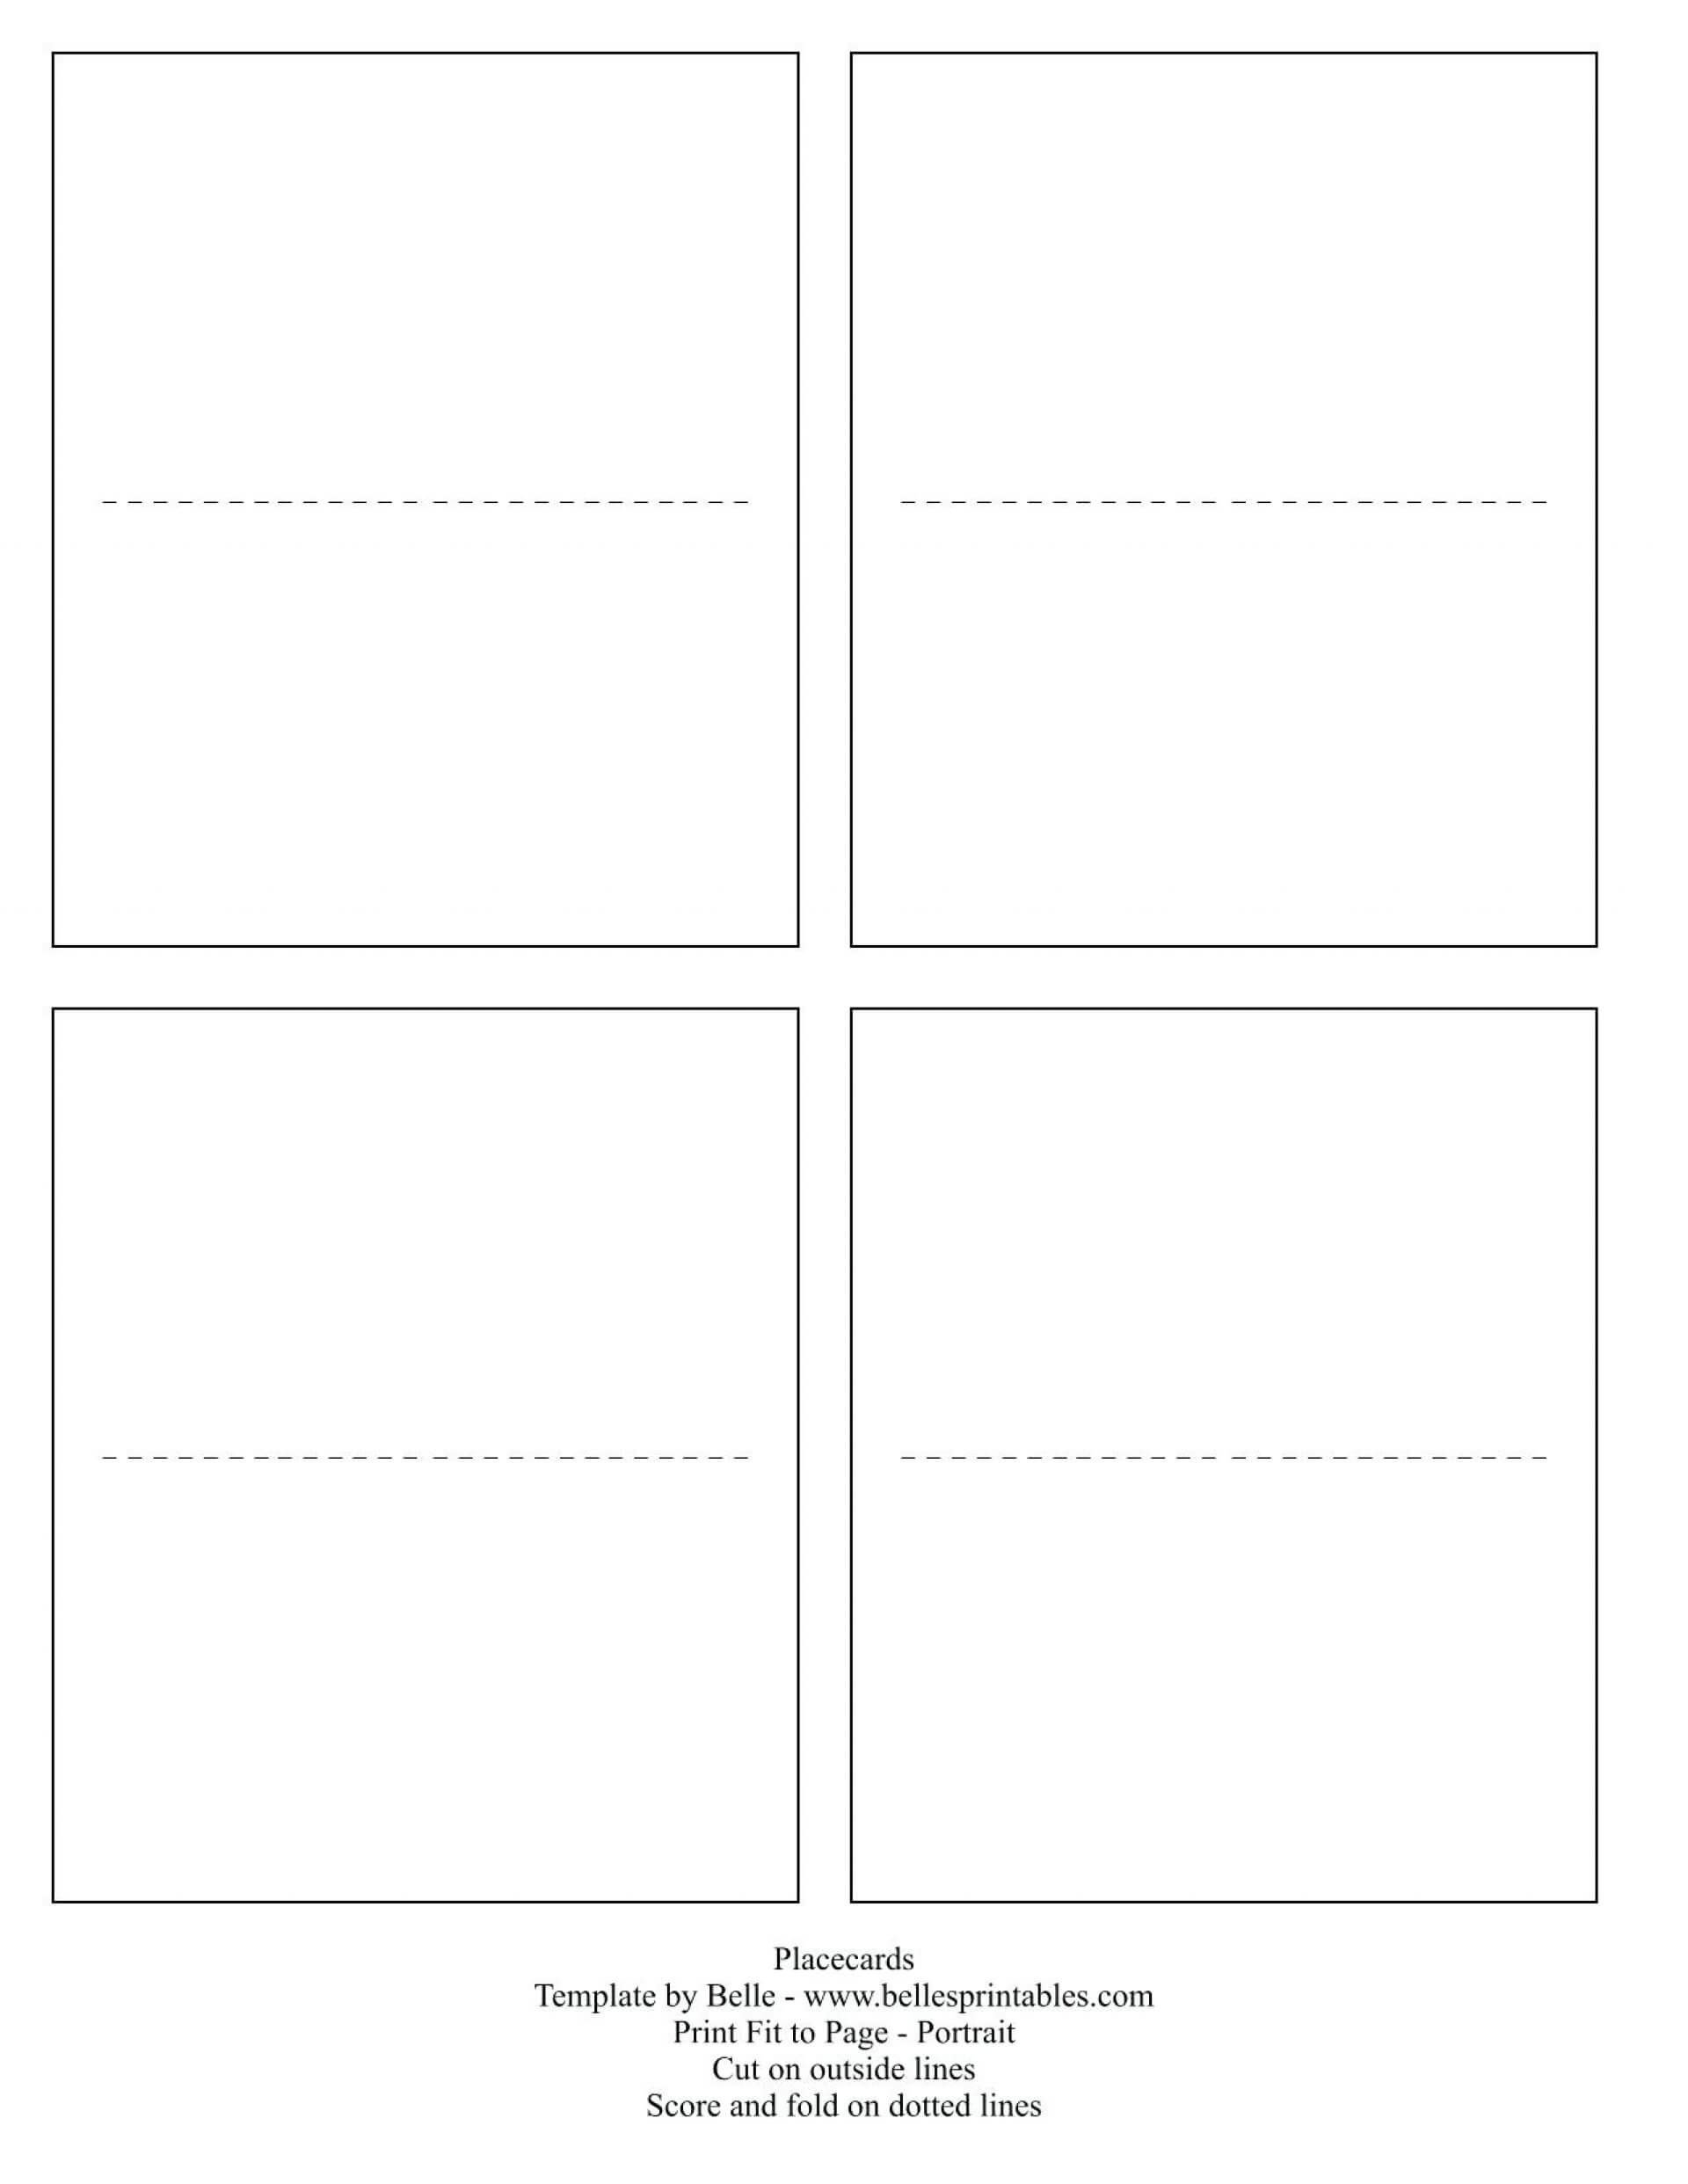 035 Template For Place Cards Il Fullxfull 2004946957 Oees Inside Place Card Template 6 Per Sheet